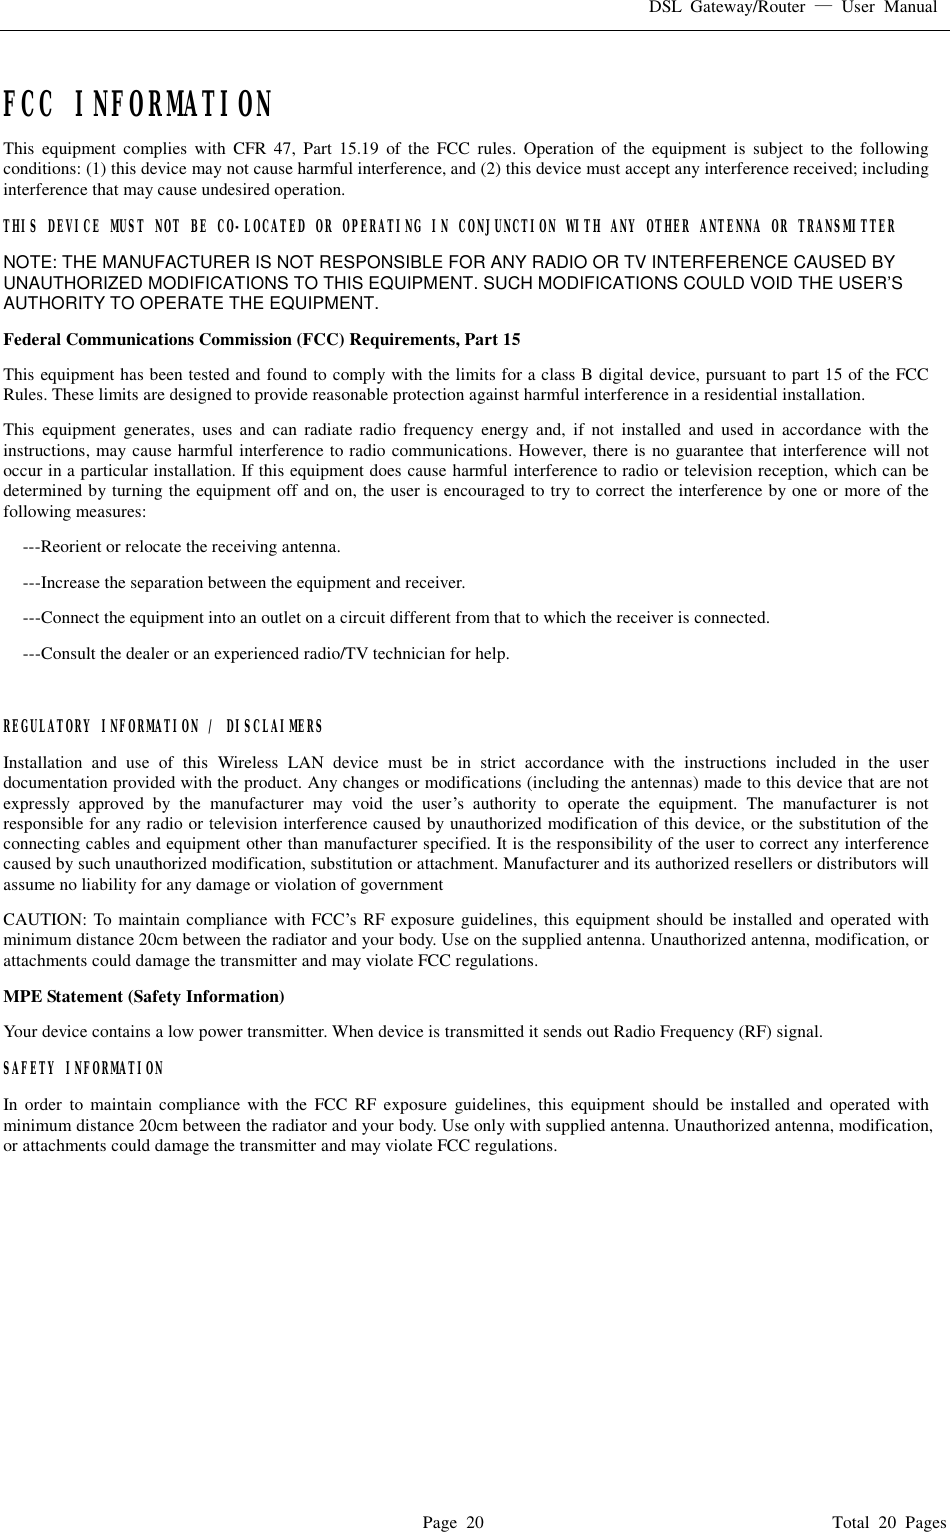 DSL Gateway/Router  — User Manual  Page 20                                       Total 20 Pages   FCC INFORMATION  This equipment complies with CFR 47, Part 15.19 of the FCC rules. Operation of the equipment is subject to the following conditions: (1) this device may not cause harmful interference, and (2) this device must accept any interference received; including interference that may cause undesired operation. THIS DEVICE MUST NOT BE CO-LOCATED OR OPERATING IN CONJUNCTION WITH ANY OTHER ANTENNA OR TRANSMITTER NOTE: THE MANUFACTURER IS NOT RESPONSIBLE FOR ANY RADIO OR TV INTERFERENCE CAUSED BY UNAUTHORIZED MODIFICATIONS TO THIS EQUIPMENT. SUCH MODIFICATIONS COULD VOID THE USER’S AUTHORITY TO OPERATE THE EQUIPMENT. Federal Communications Commission (FCC) Requirements, Part 15  This equipment has been tested and found to comply with the limits for a class B digital device, pursuant to part 15 of the FCC Rules. These limits are designed to provide reasonable protection against harmful interference in a residential installation. This equipment generates, uses and can radiate radio frequency energy and, if not installed and used in accordance with the instructions, may cause harmful interference to radio communications. However, there is no guarantee that interference will not occur in a particular installation. If this equipment does cause harmful interference to radio or television reception, which can be determined by turning the equipment off and on, the user is encouraged to try to correct the interference by one or more of the following measures: ---Reorient or relocate the receiving antenna. ---Increase the separation between the equipment and receiver. ---Connect the equipment into an outlet on a circuit different from that to which the receiver is connected. ---Consult the dealer or an experienced radio/TV technician for help.  REGULATORY INFORMATION / DISCLAIMERS Installation and use of this Wireless LAN device must be in strict accordance with the instructions included in the user documentation provided with the product. Any changes or modifications (including the antennas) made to this device that are not expressly approved by the manufacturer may void the user’s authority to operate the equipment. The manufacturer is not responsible for any radio or television interference caused by unauthorized modification of this device, or the substitution of the connecting cables and equipment other than manufacturer specified. It is the responsibility of the user to correct any interference caused by such unauthorized modification, substitution or attachment. Manufacturer and its authorized resellers or distributors will assume no liability for any damage or violation of government CAUTION: To maintain compliance with FCC’s RF exposure guidelines, this equipment should be installed and operated with minimum distance 20cm between the radiator and your body. Use on the supplied antenna. Unauthorized antenna, modification, or attachments could damage the transmitter and may violate FCC regulations. MPE Statement (Safety Information) Your device contains a low power transmitter. When device is transmitted it sends out Radio Frequency (RF) signal. SAFETY INFORMATION In order to maintain compliance with the FCC RF exposure guidelines, this equipment should be installed and operated with minimum distance 20cm between the radiator and your body. Use only with supplied antenna. Unauthorized antenna, modification, or attachments could damage the transmitter and may violate FCC regulations.   